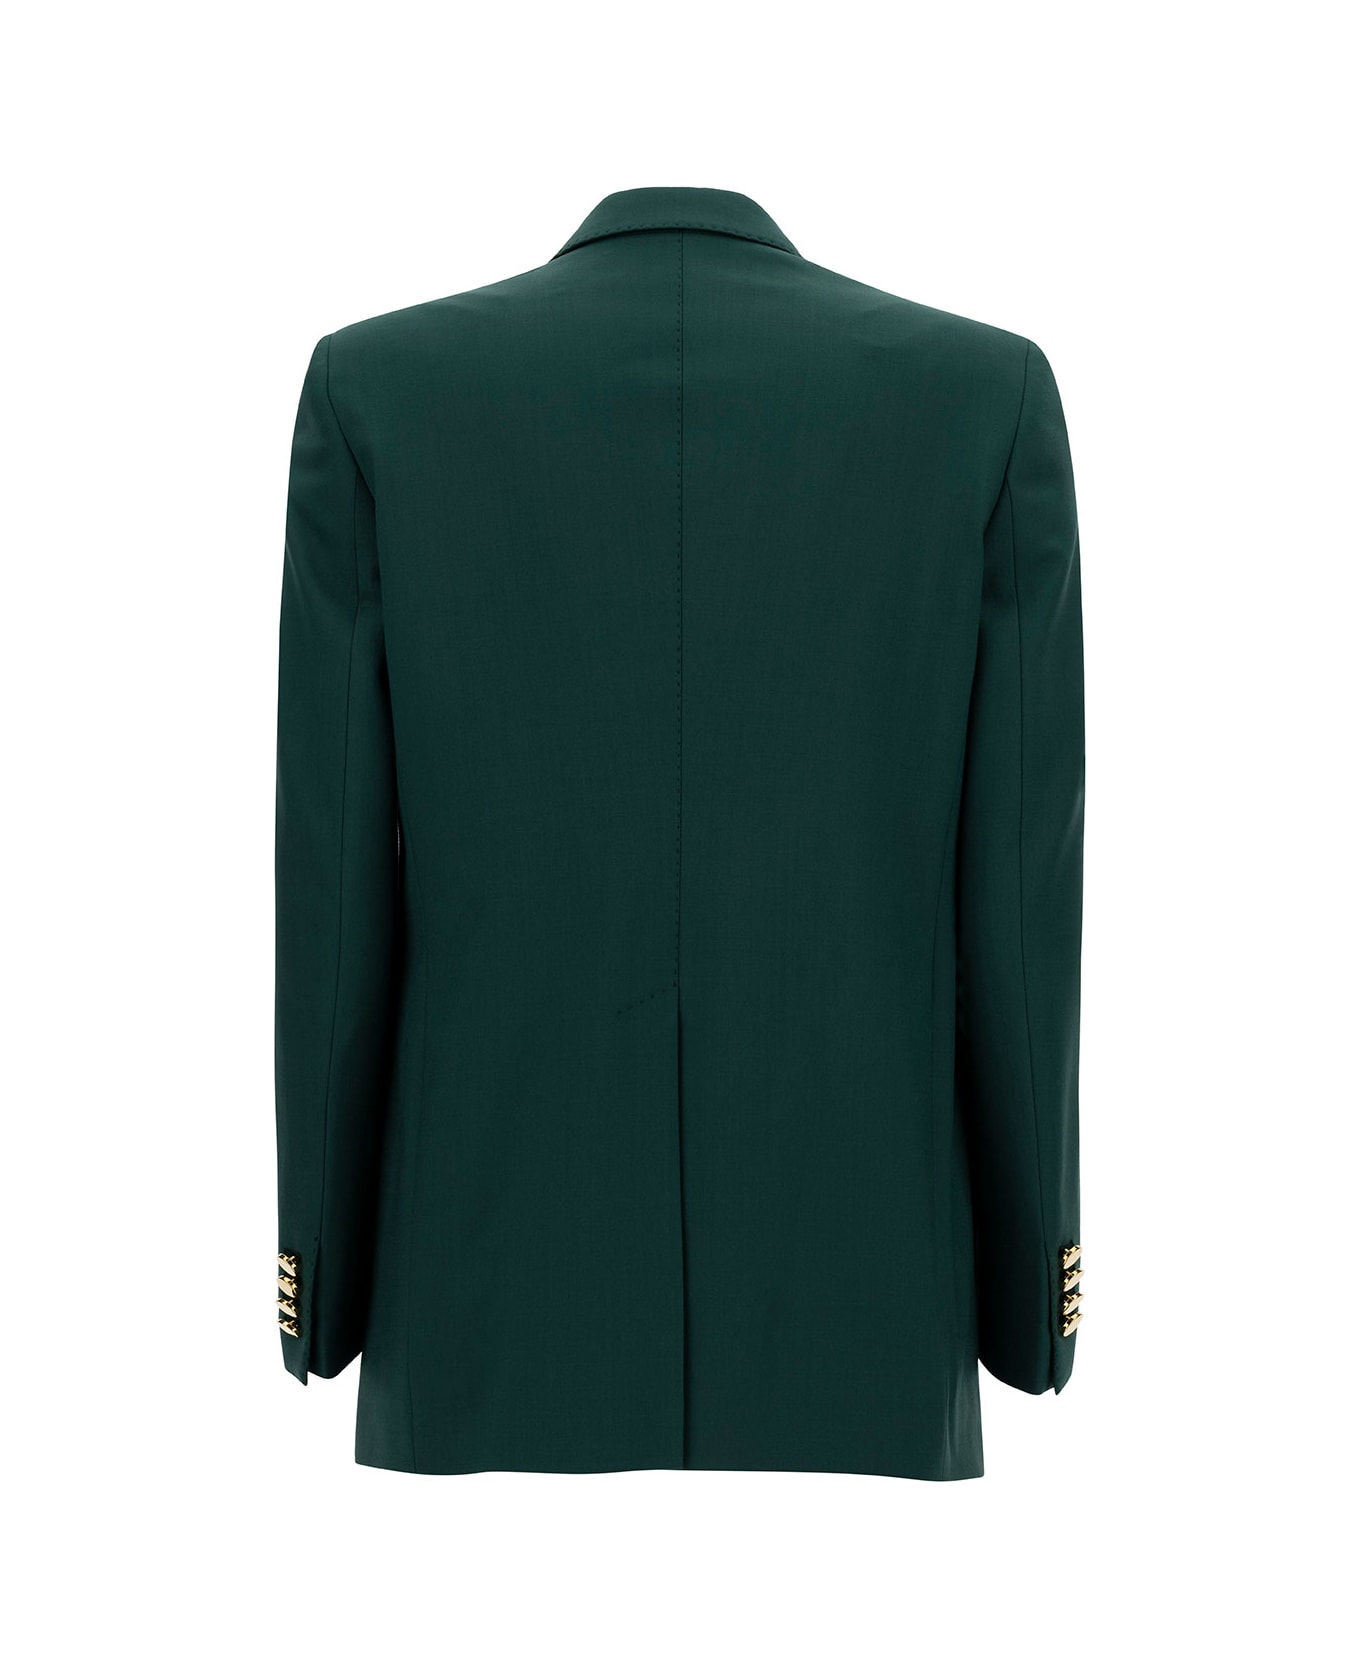 Tagliatore 'jasmine' Green Double-breasted Jacket With Golden Buttons In Stretch Wool Blend Woman - Green ジャケット